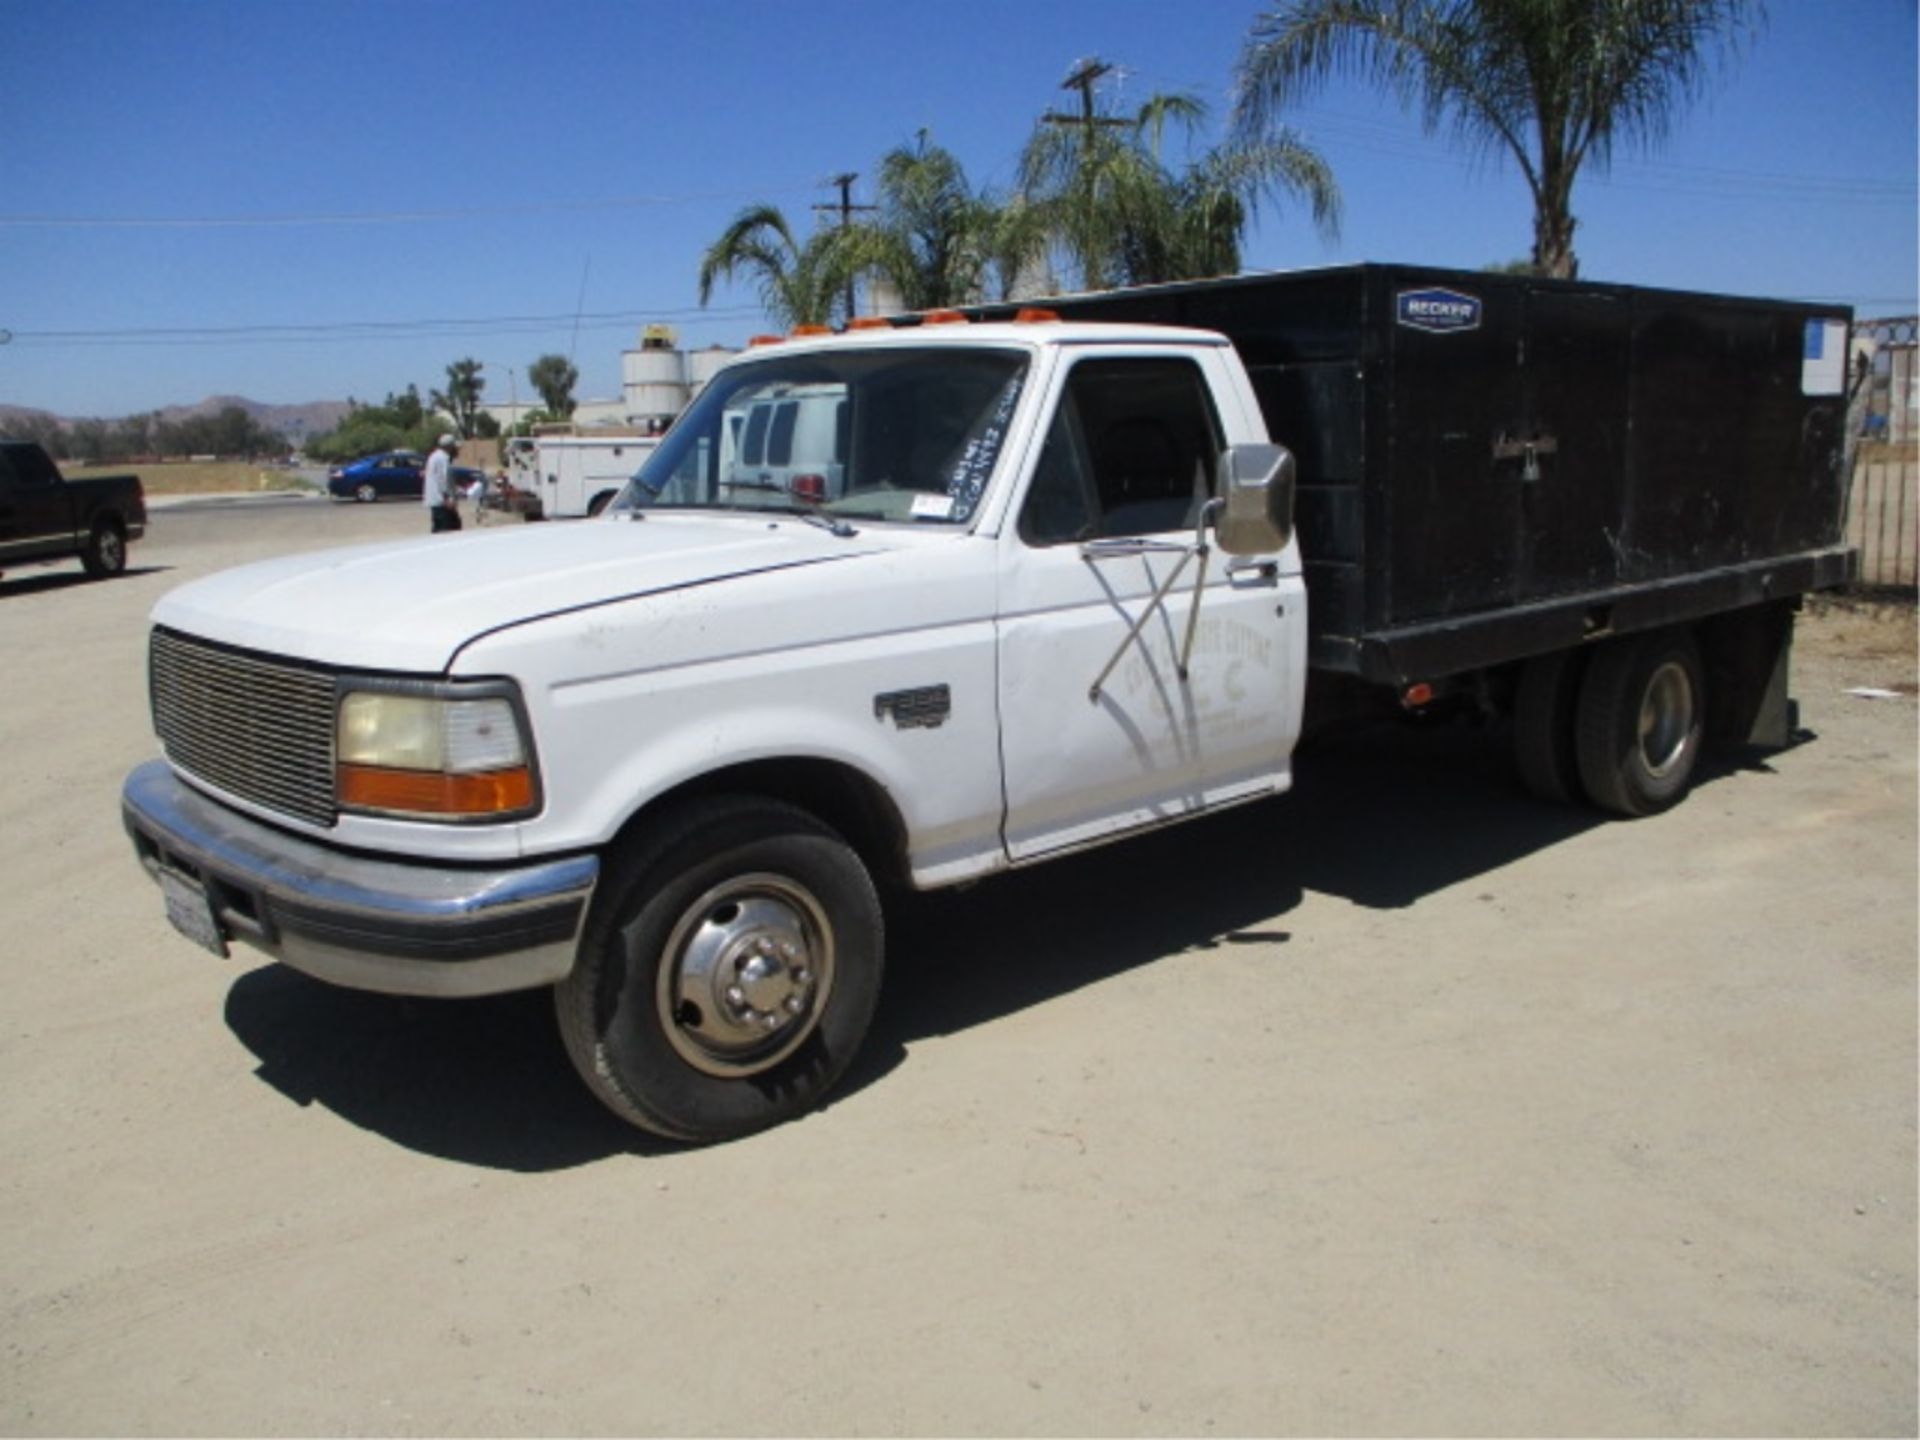 Ford F350 Saw Truck, 7.3L Power Stroke Diesel, Automatic, Waltco Lift Gate, Poly Water Tank, Storage